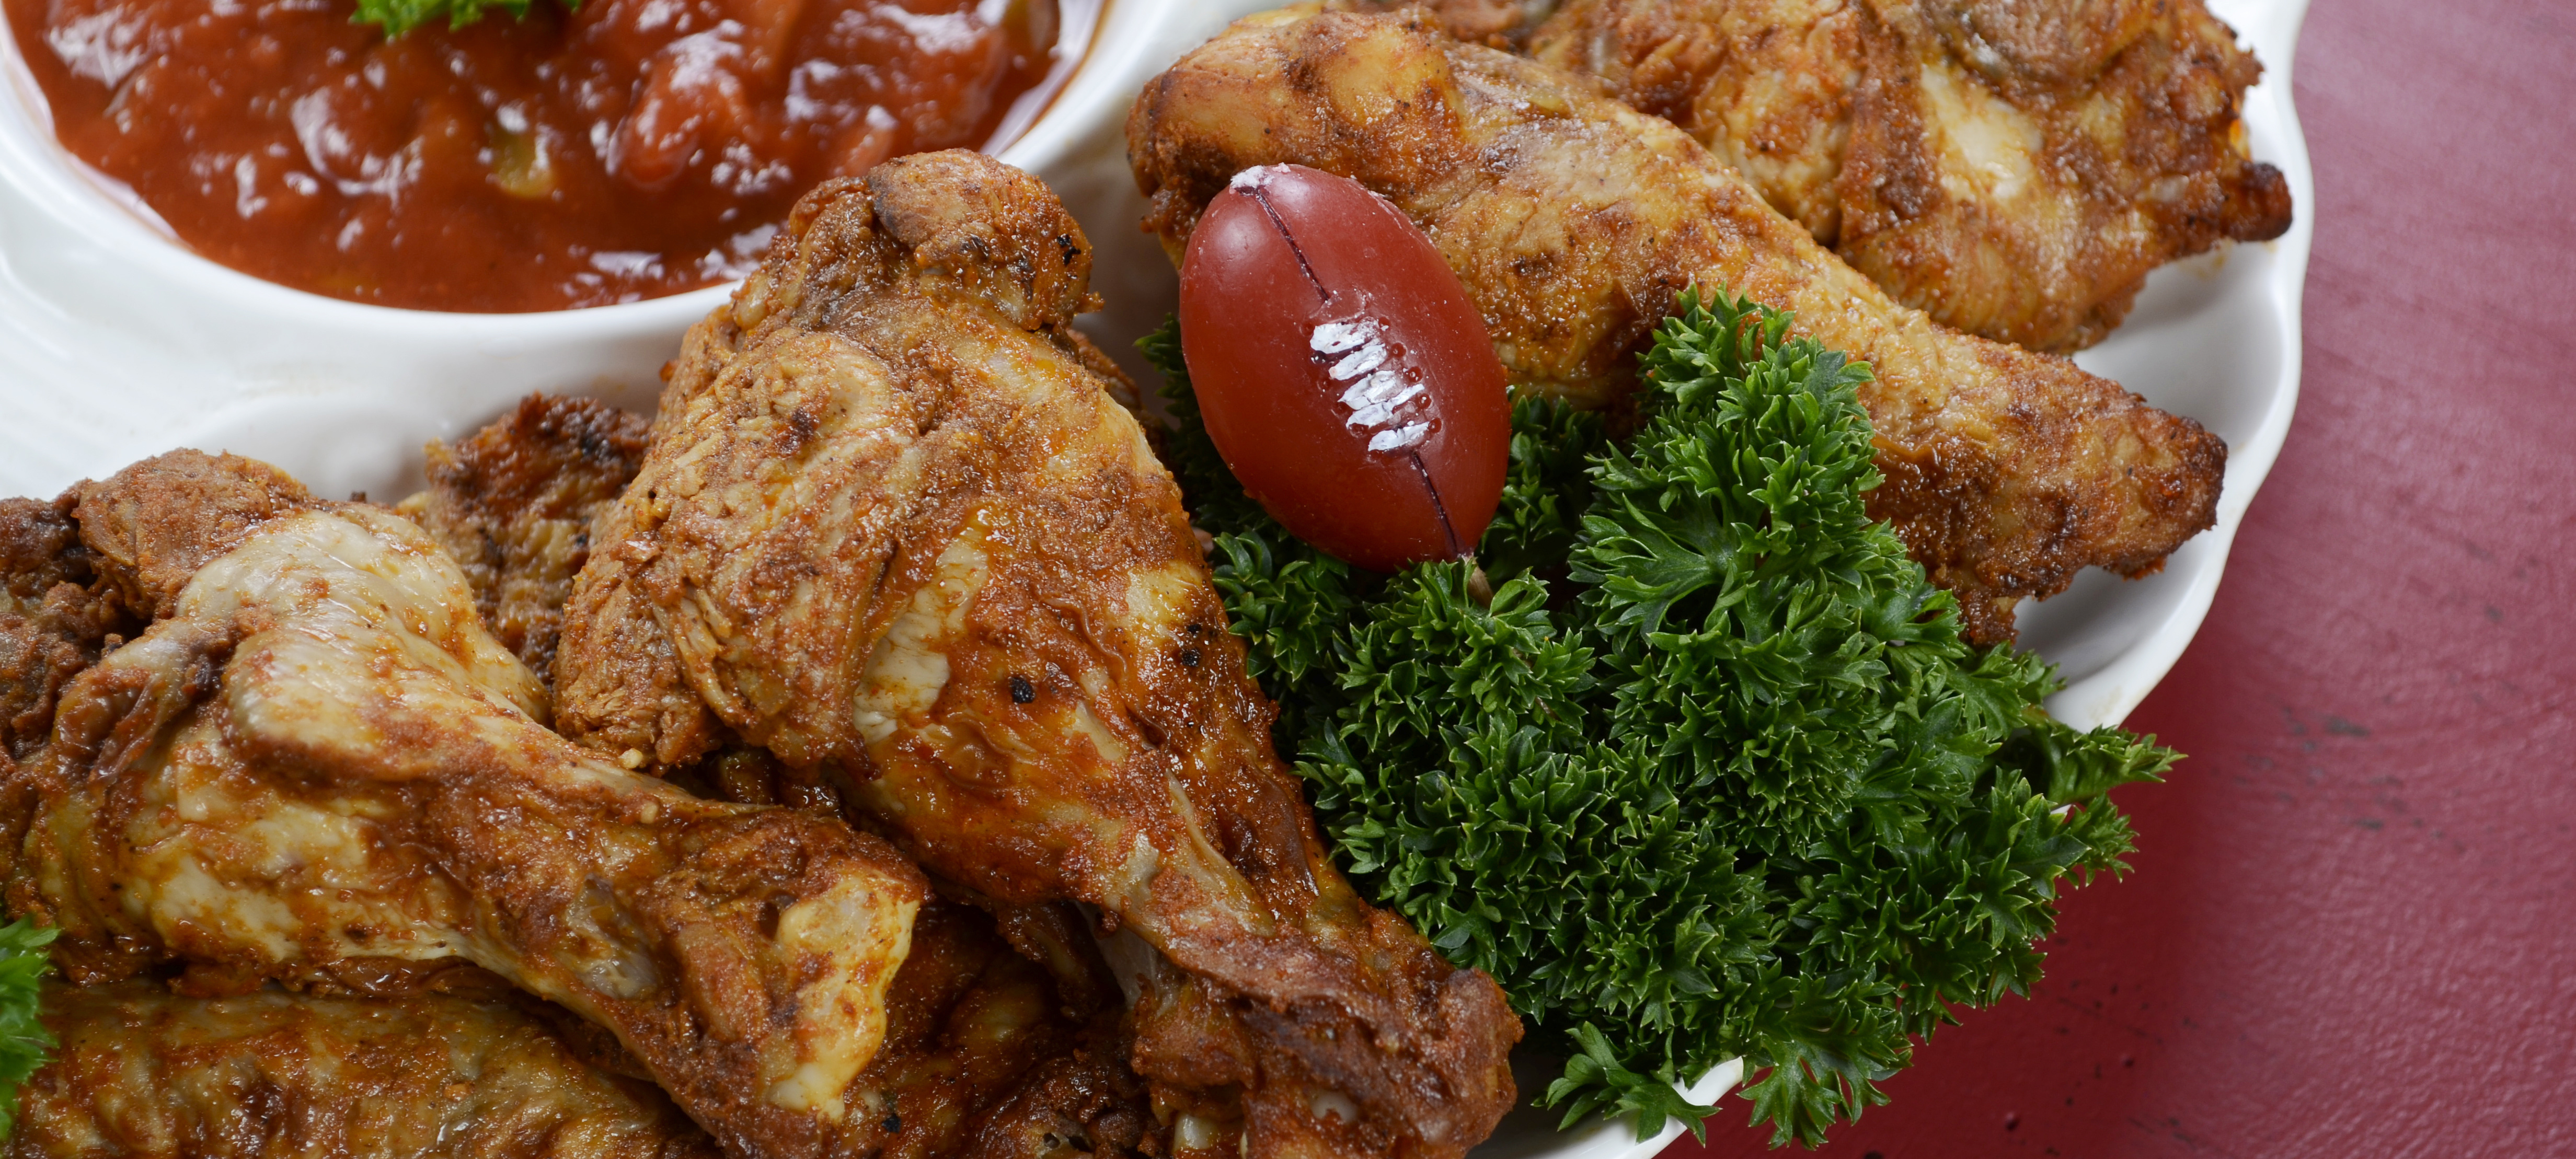 Sports bars should package chicken wings for NCAA Bowl Season tailgate menus.